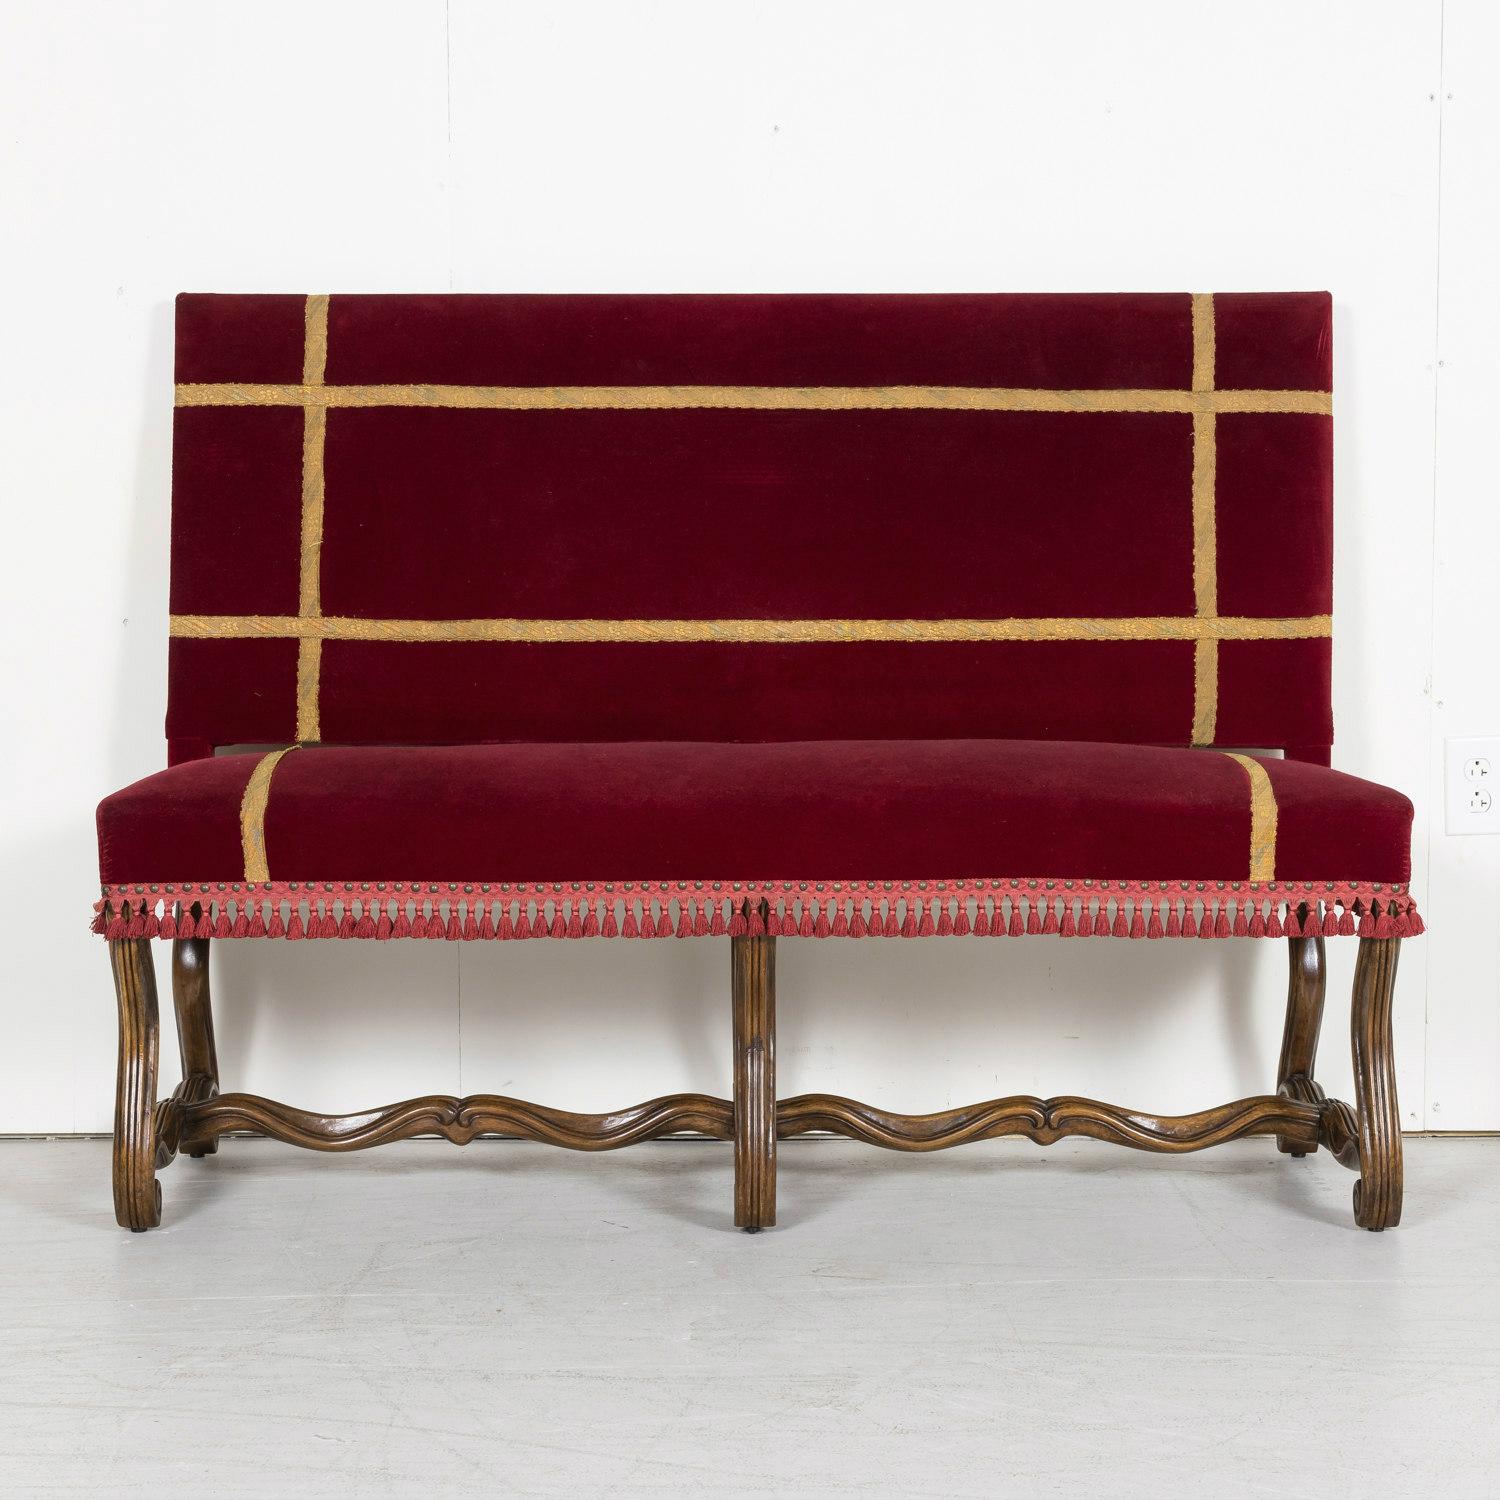 Walnut 19th Century Upholstered Spanish Catalan Bench  For Sale